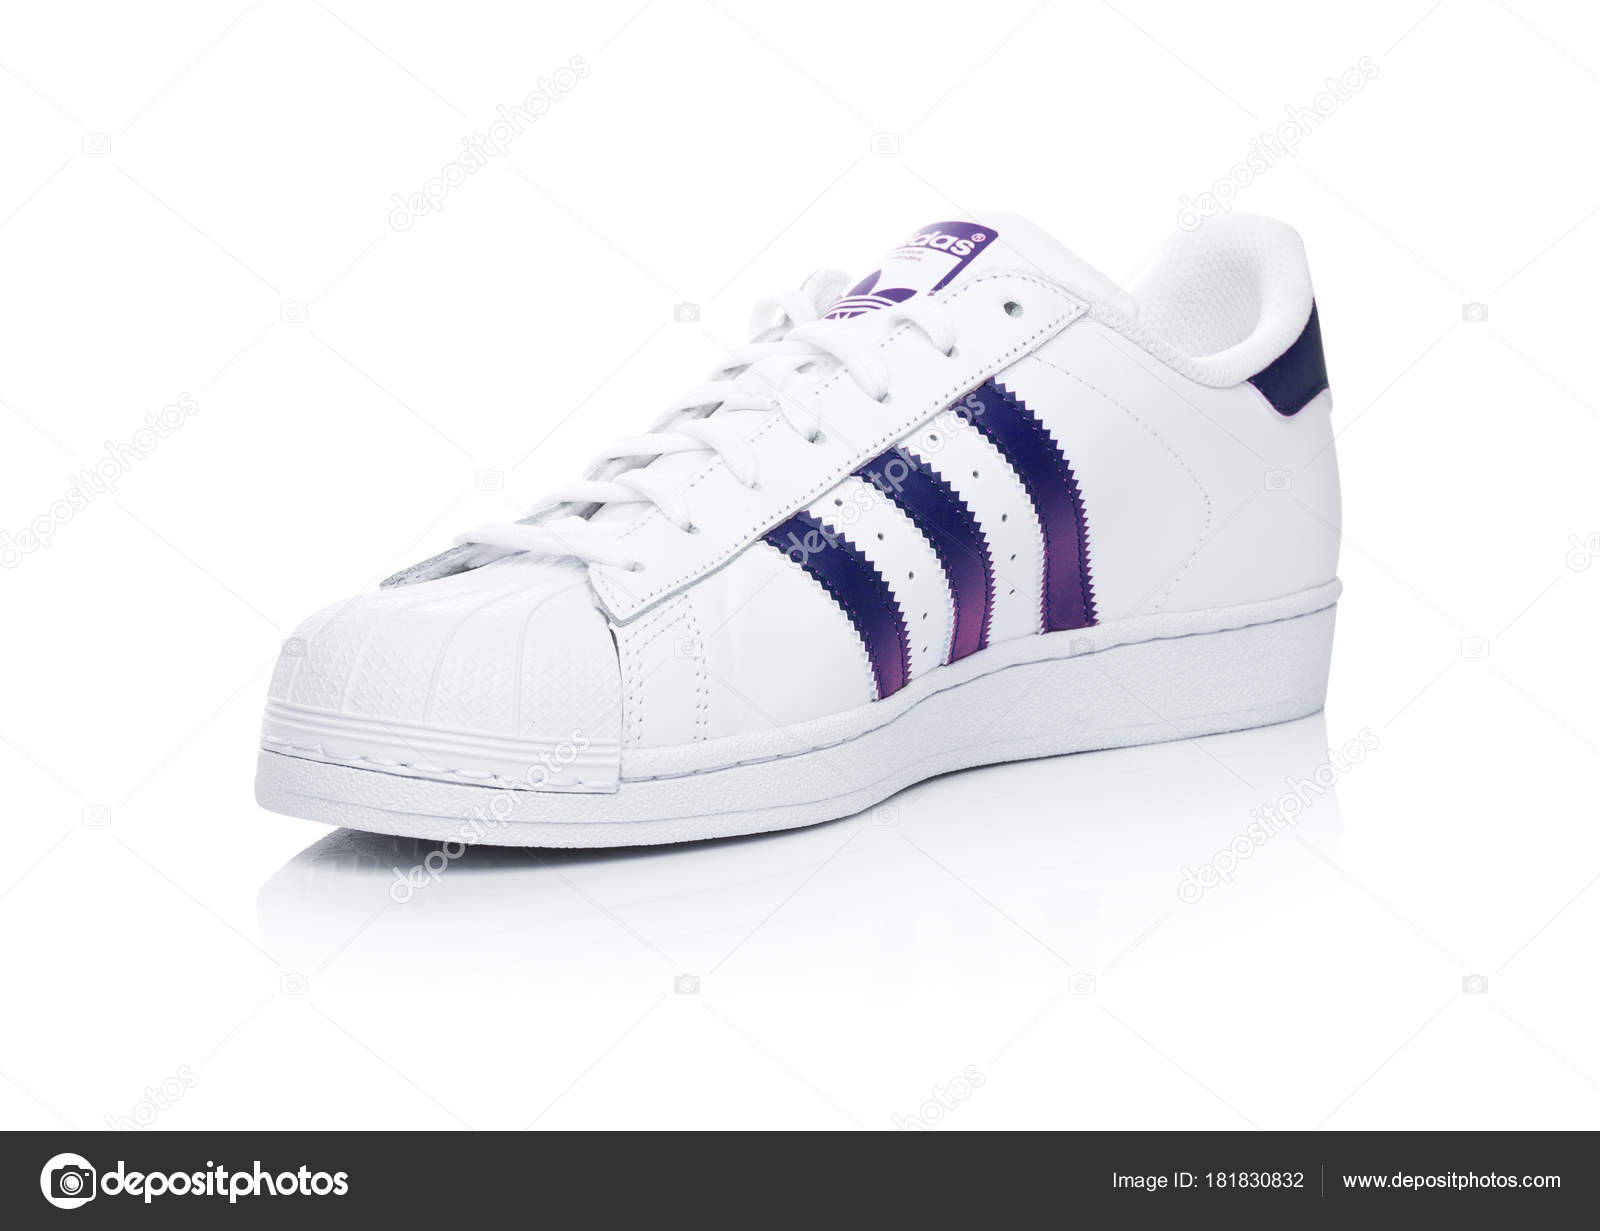 LONDON, UK - 24, 2018: Adidas Originals Superstar blue shoes white.German multinational corporation that designs and manufactures sports shoes, clothing and accessories. – Stock Editorial Photo DenisMArt #181830832